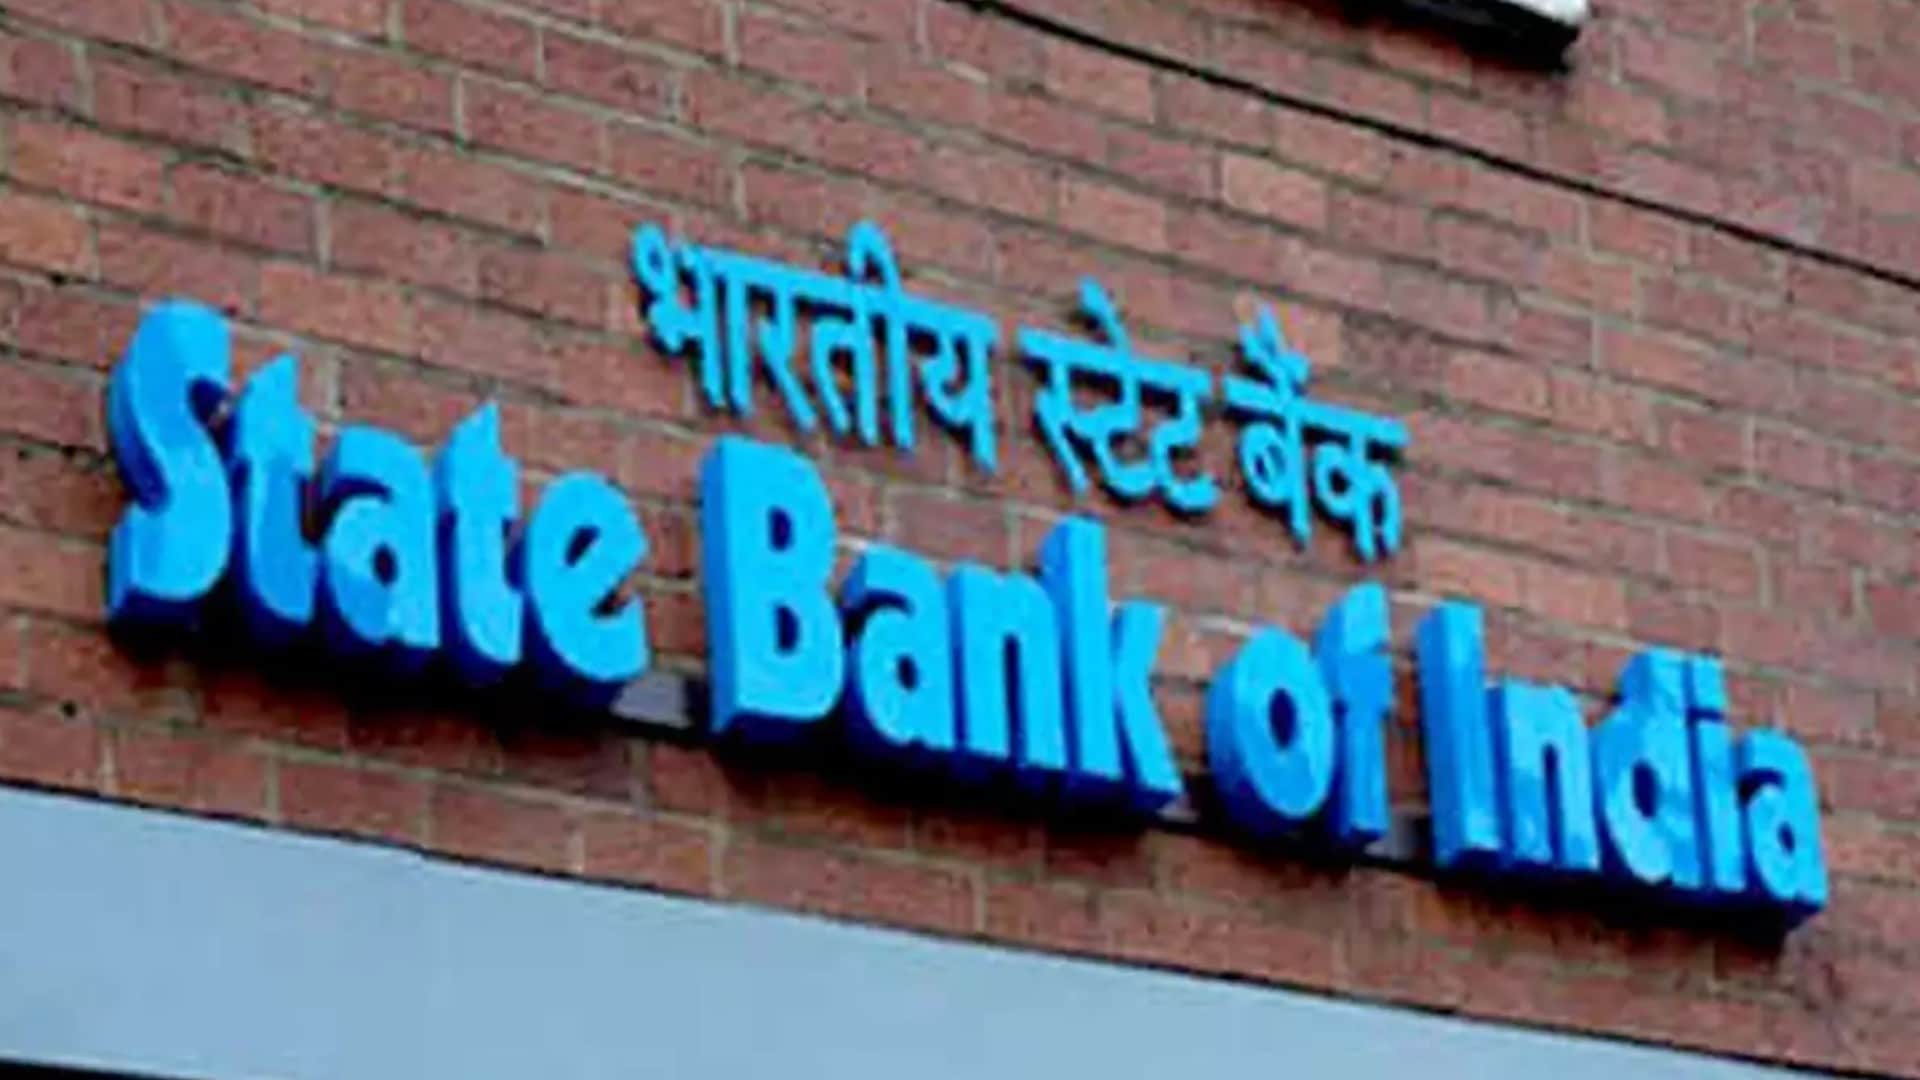 New SBI Cash Withdrawal Rules: Pay Rs 15 Plus GST For Withdrawing Cash After 4 Free Usage